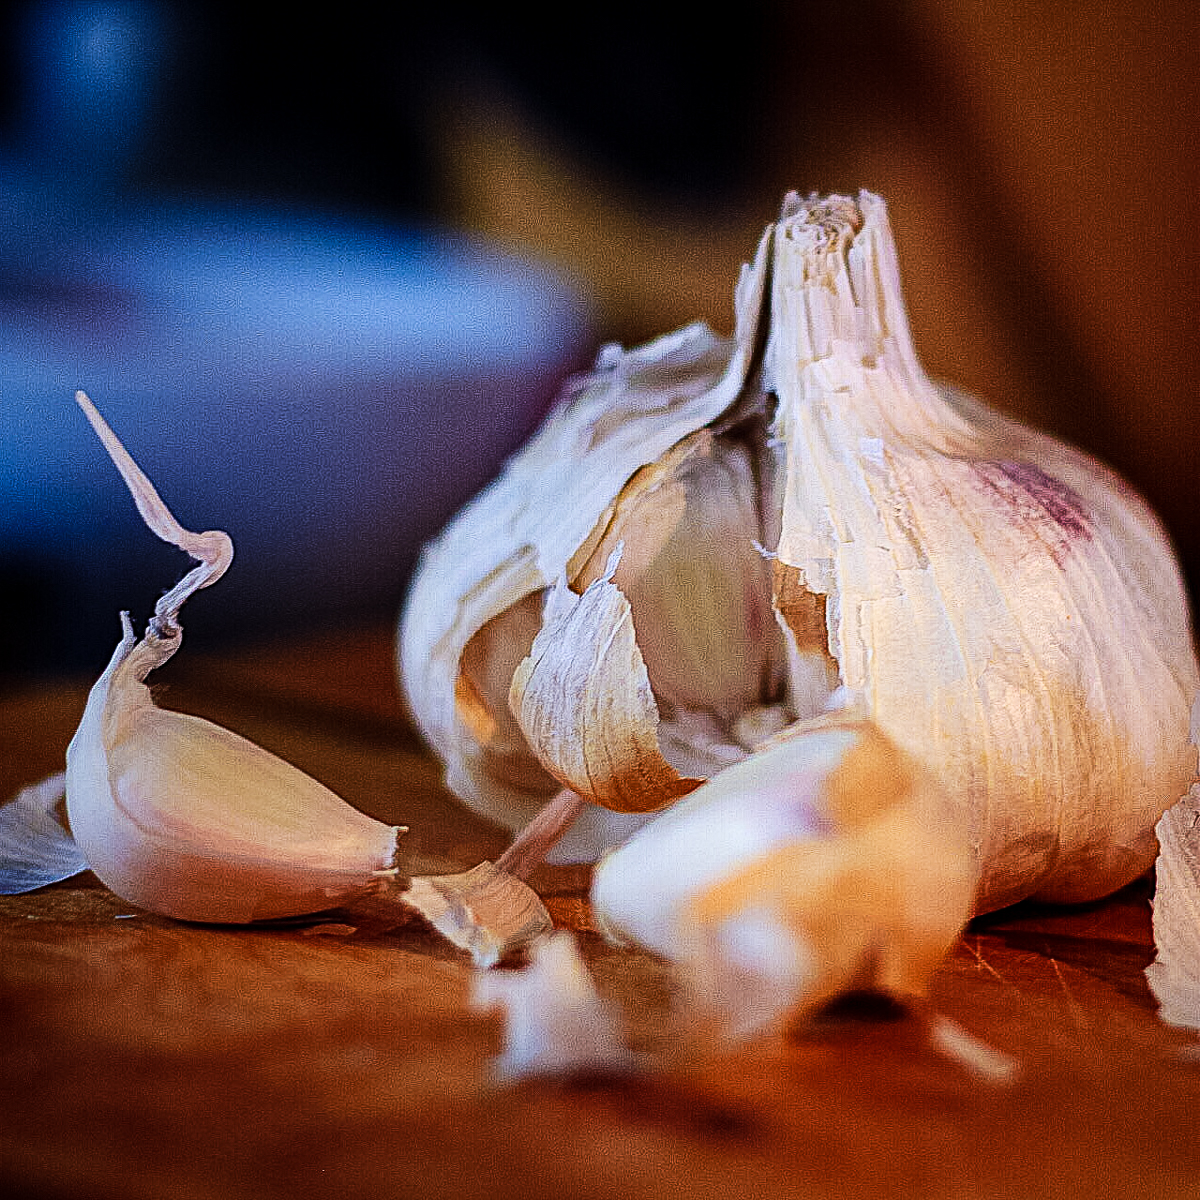 A bulb of garlic with the papery husk peeled back on one side and 2 garlic cloves pulled out and laying beside.